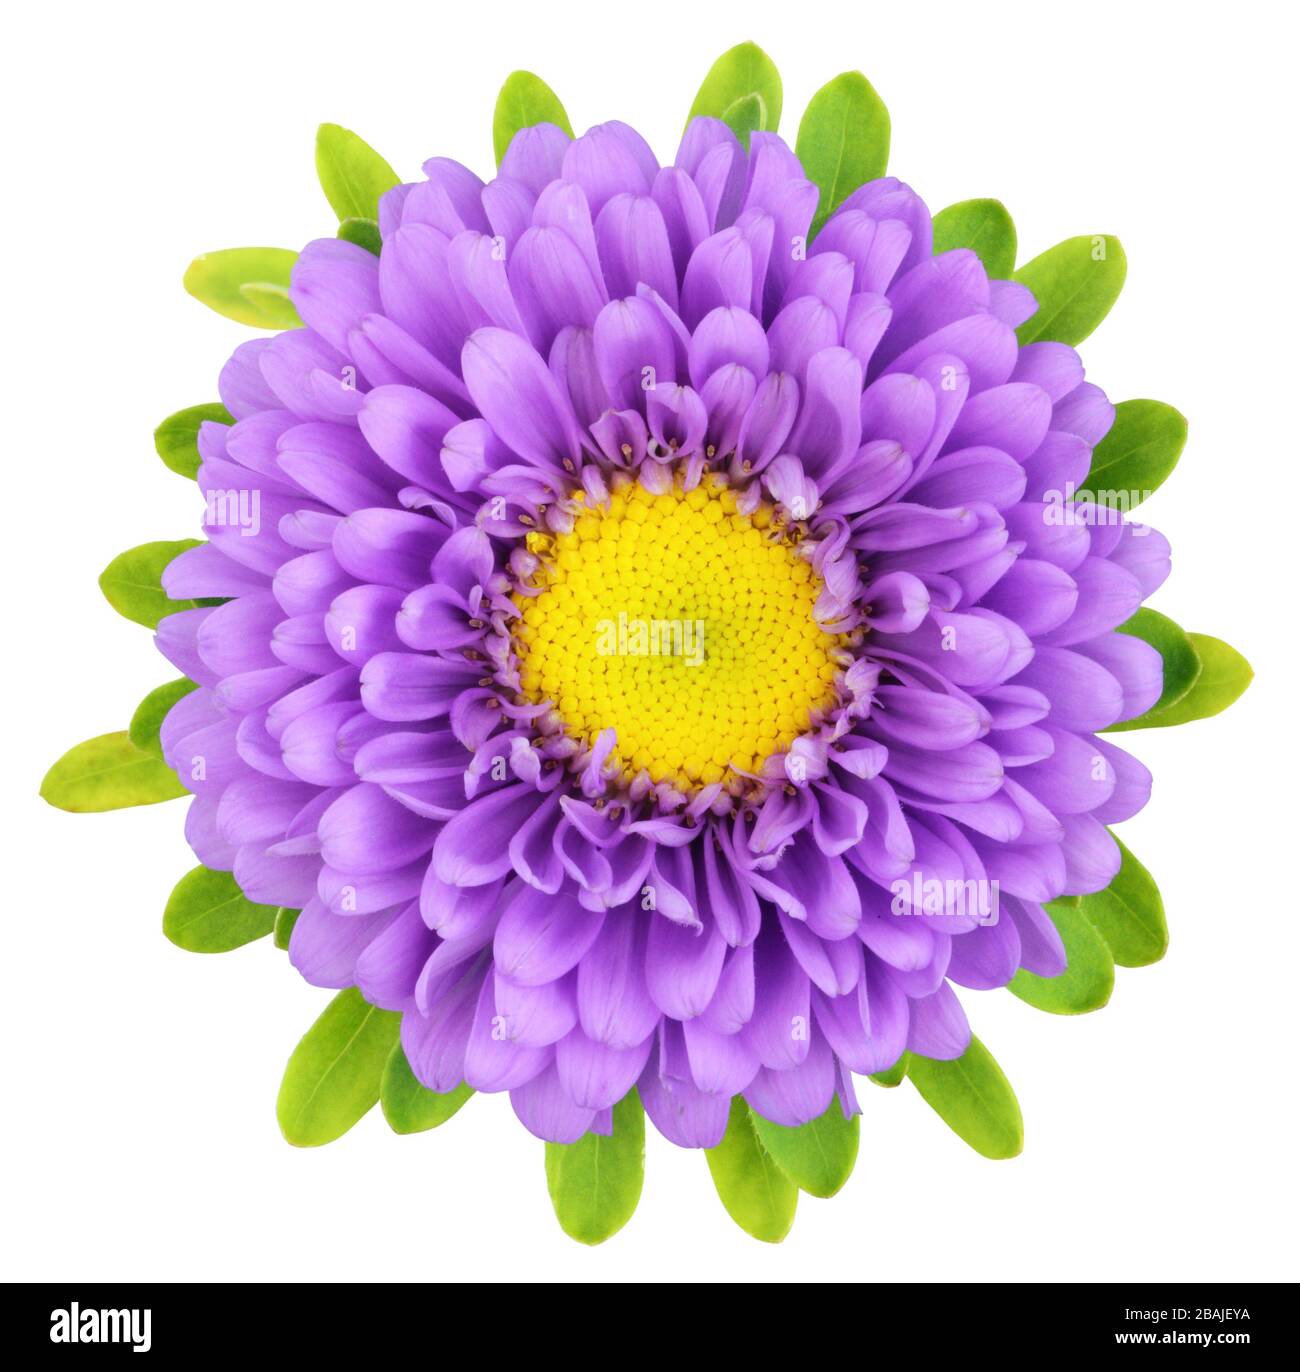 Beautiful Chrysanthemum (Chrysantheme) isolated on white background, including clipping path. Germany Stock Photo